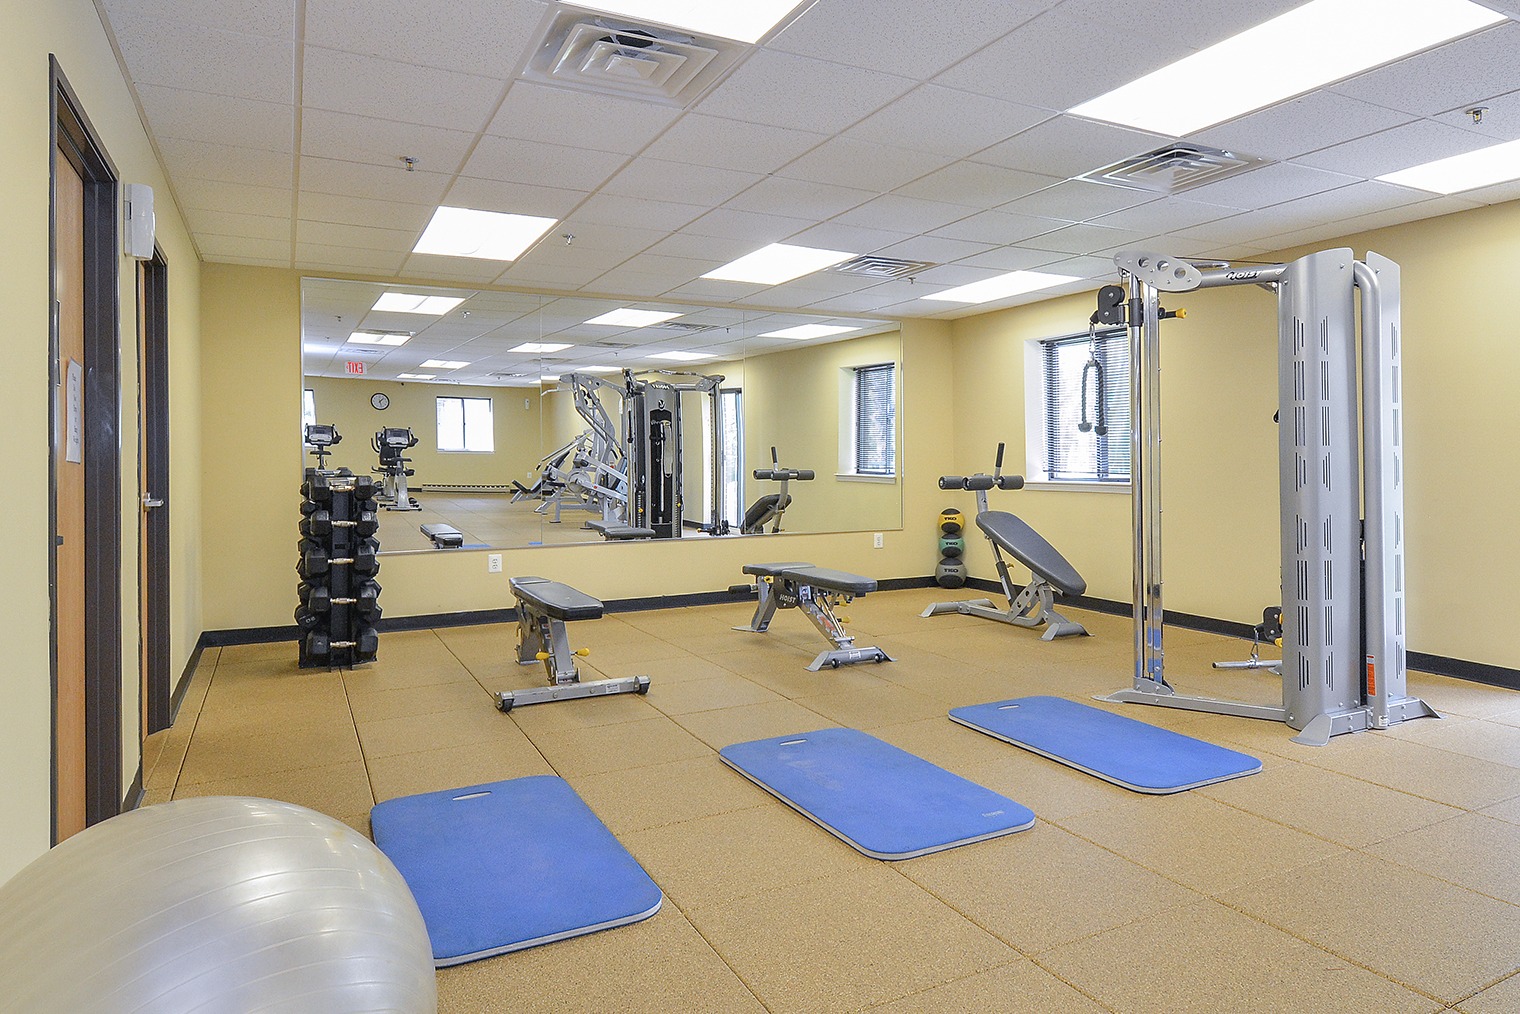 Fitness center with mats and exercise machines